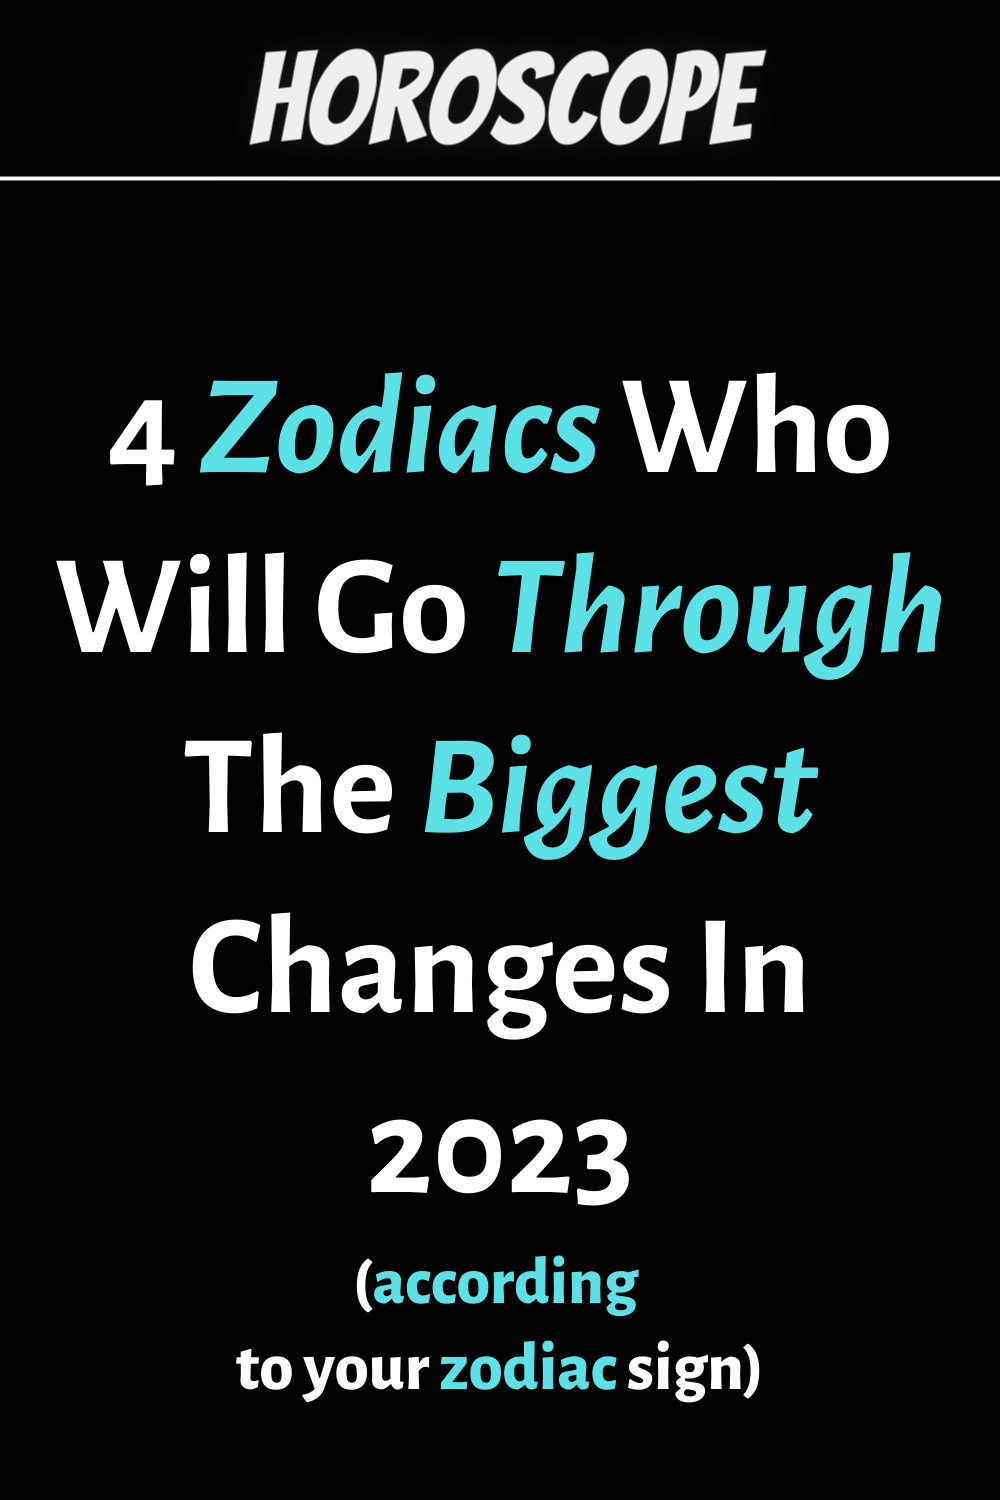 4 Zodiacs Who Will Go Through The Biggest Changes In 2023